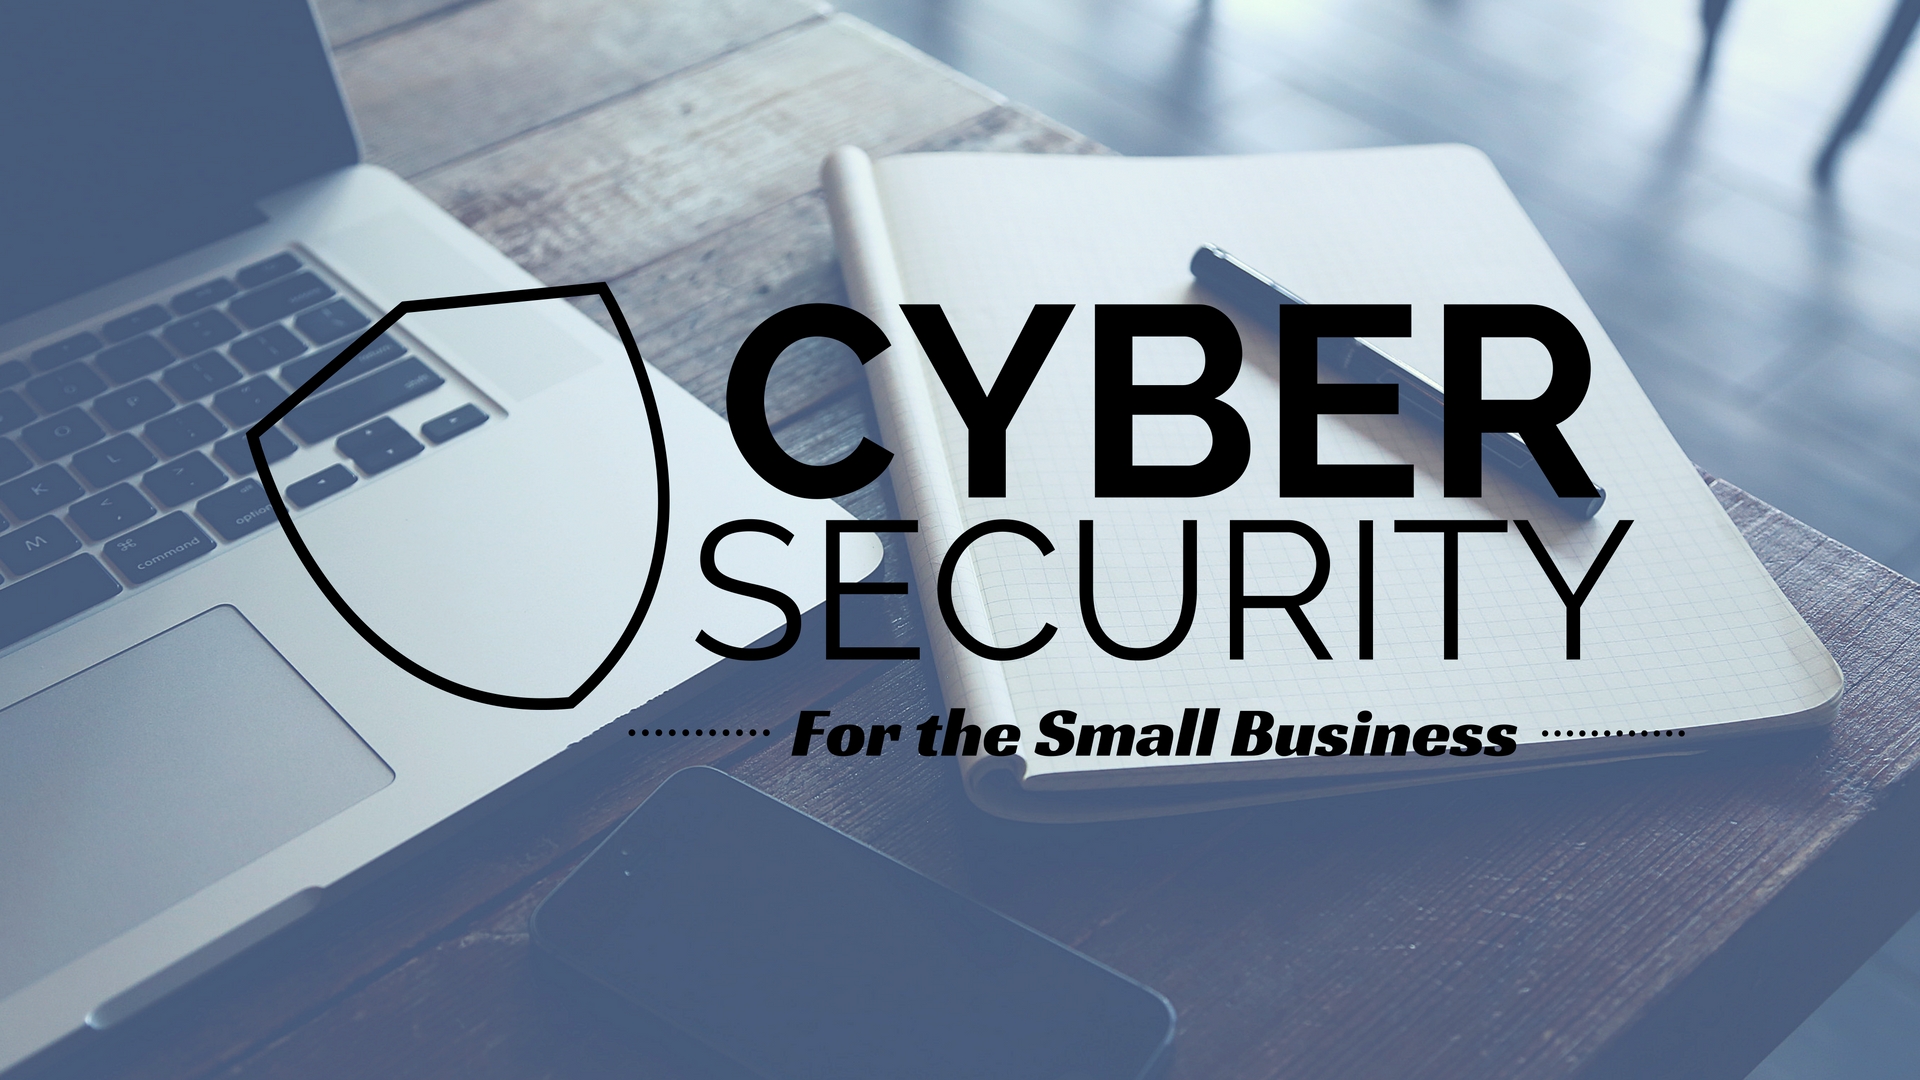 Cyber Security For the Small Business